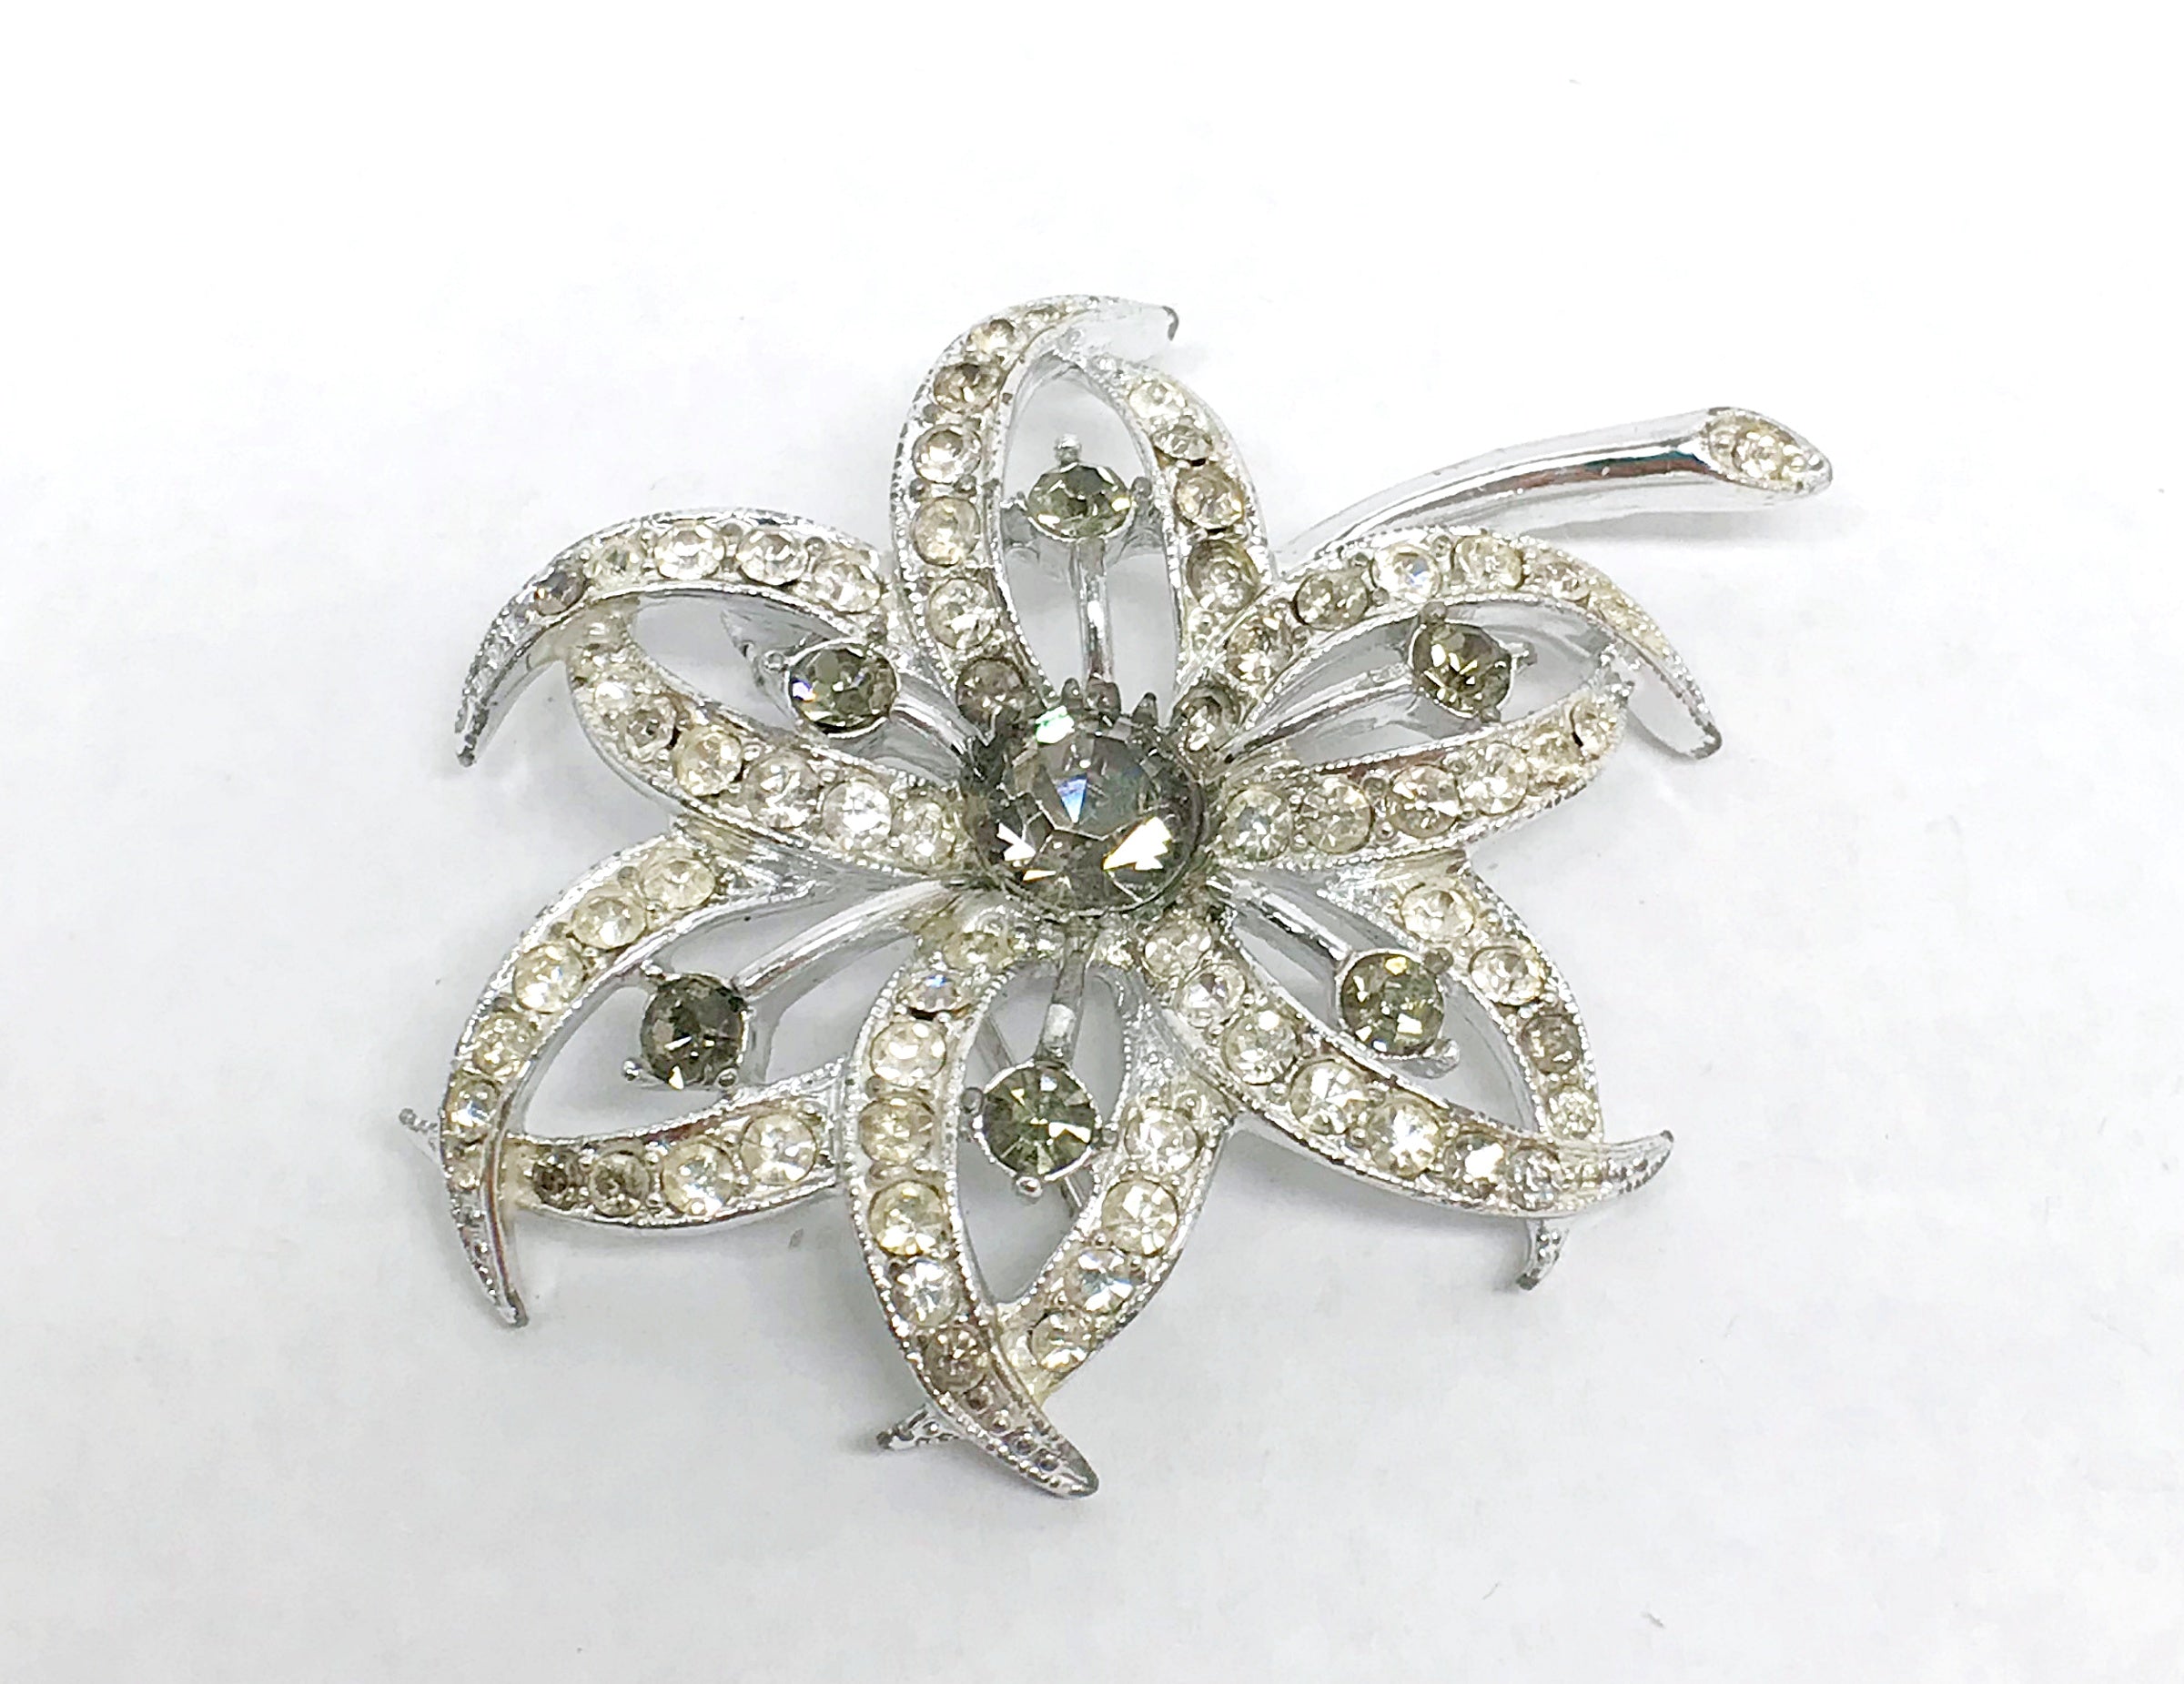 1966 Sarah Coventry Evening Star Flower Rhinestone Brooch Pin - Hers and His Treasures